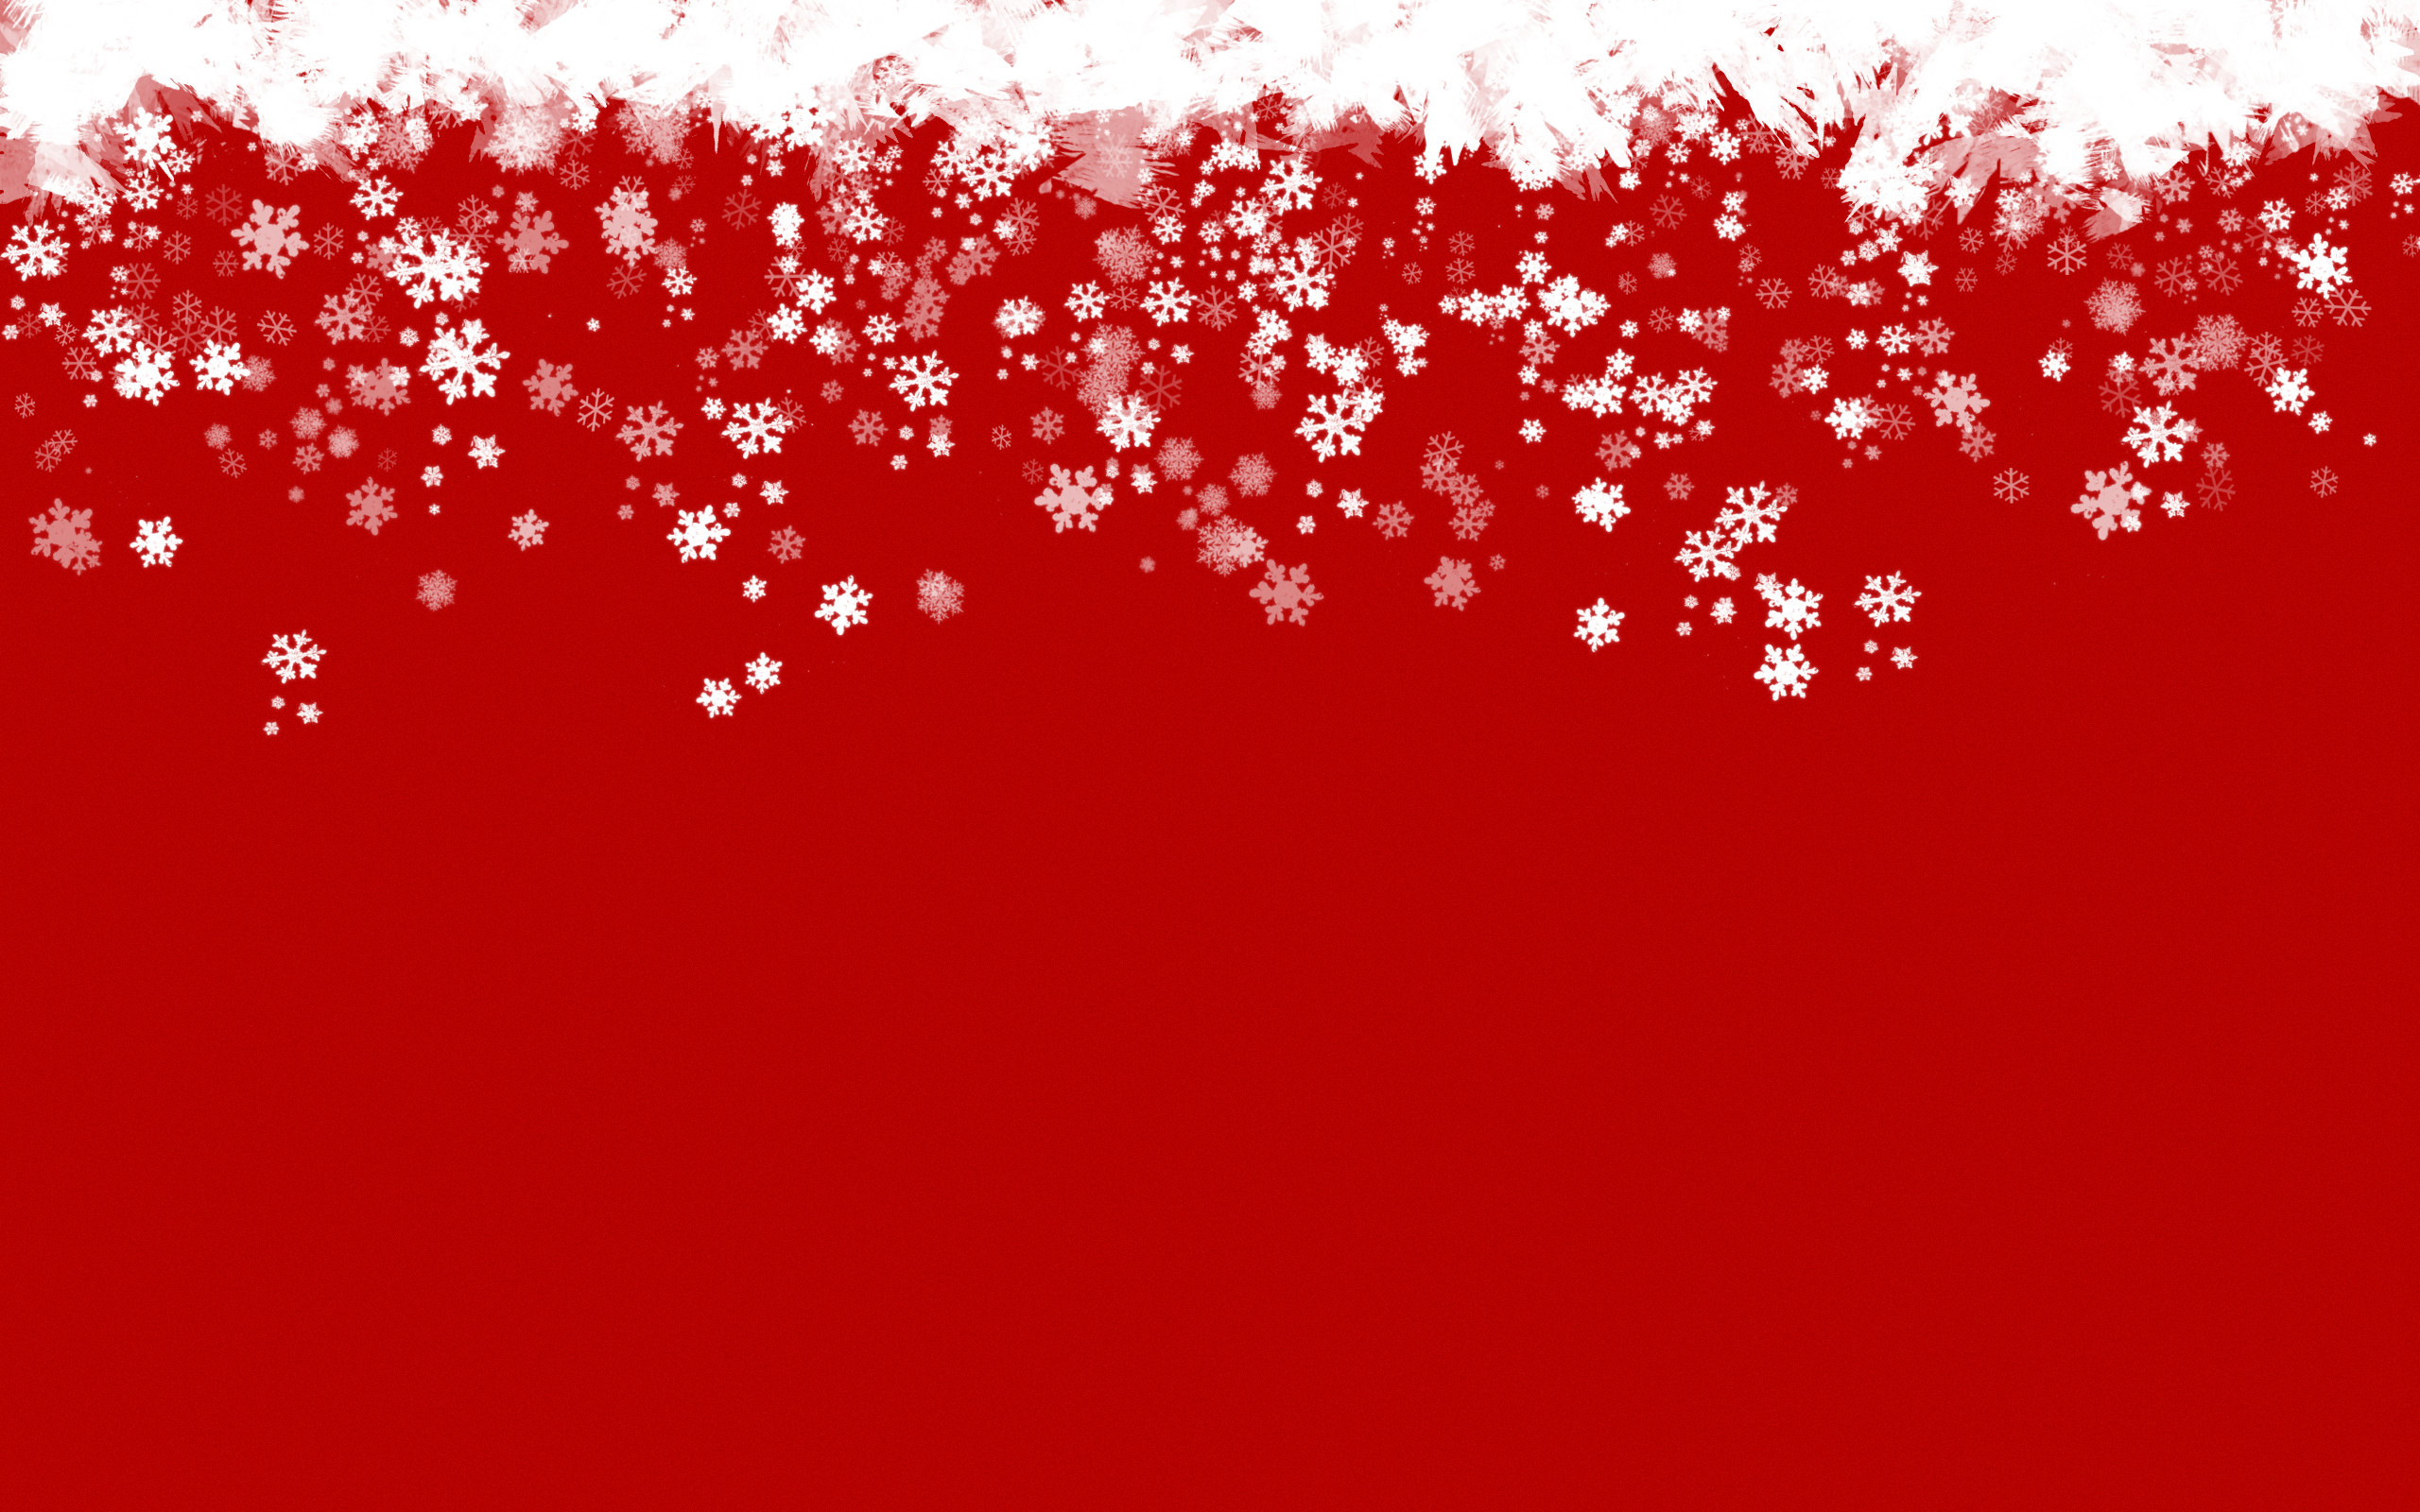 2560x1600 Red Christmas Snowflake Backgrounds (21)